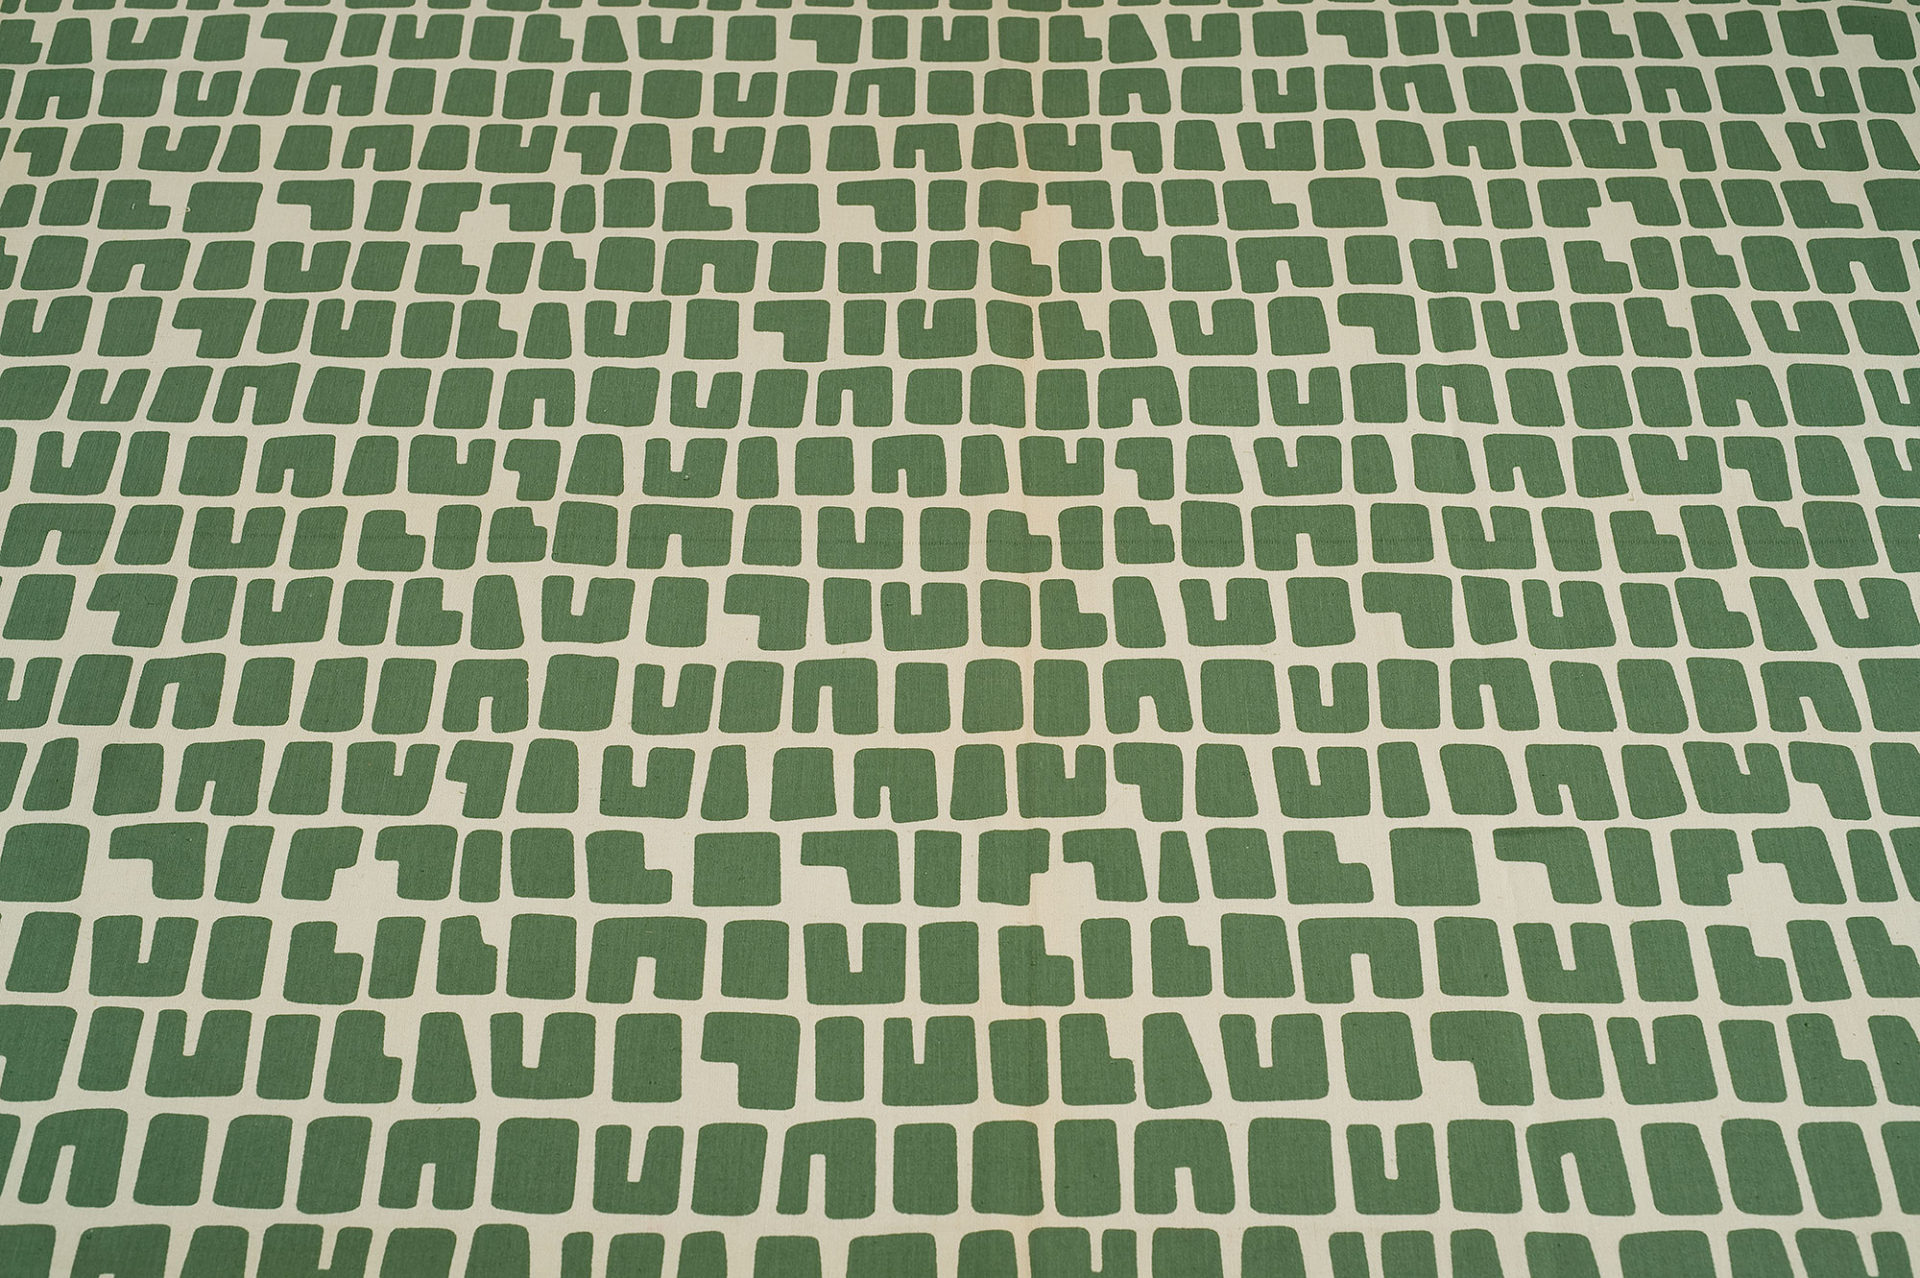 White textile with horizontal rows of blocky letter-like shapes in green.